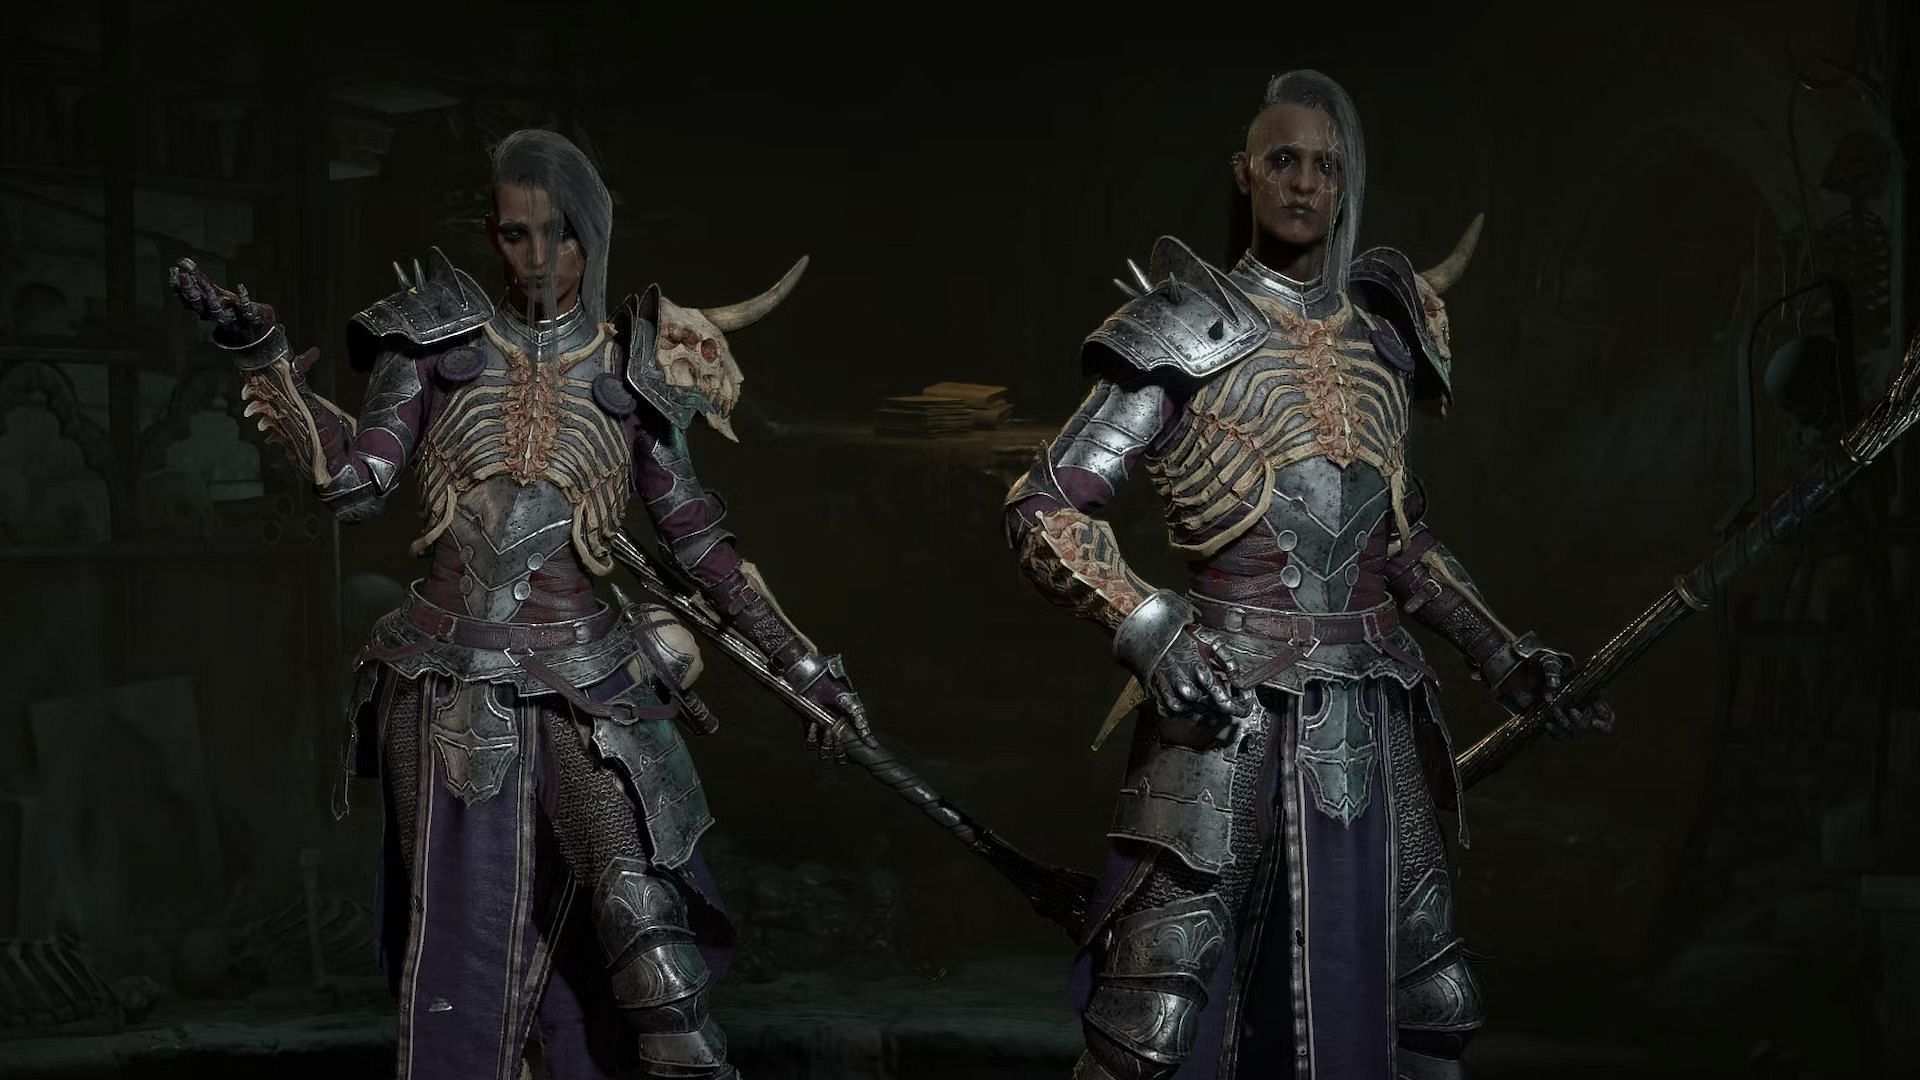 Two Necromancers in the game.